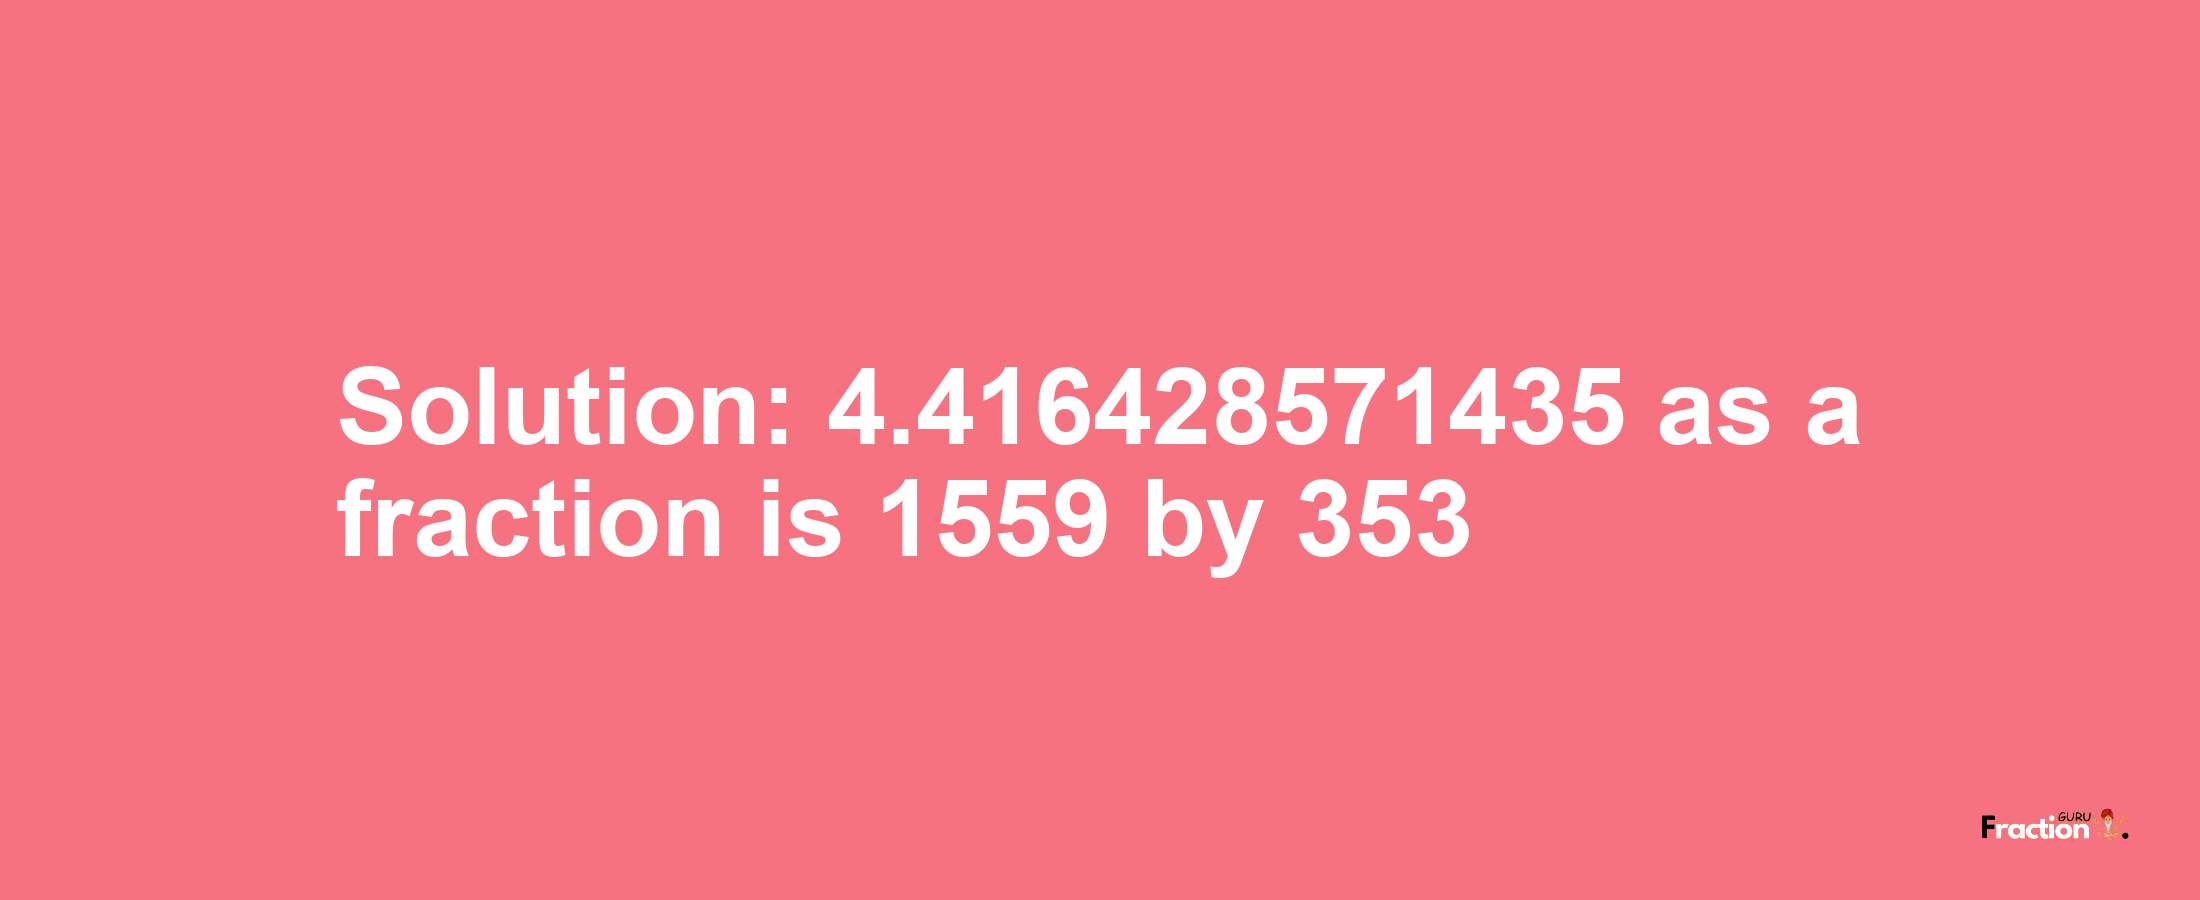 Solution:4.416428571435 as a fraction is 1559/353